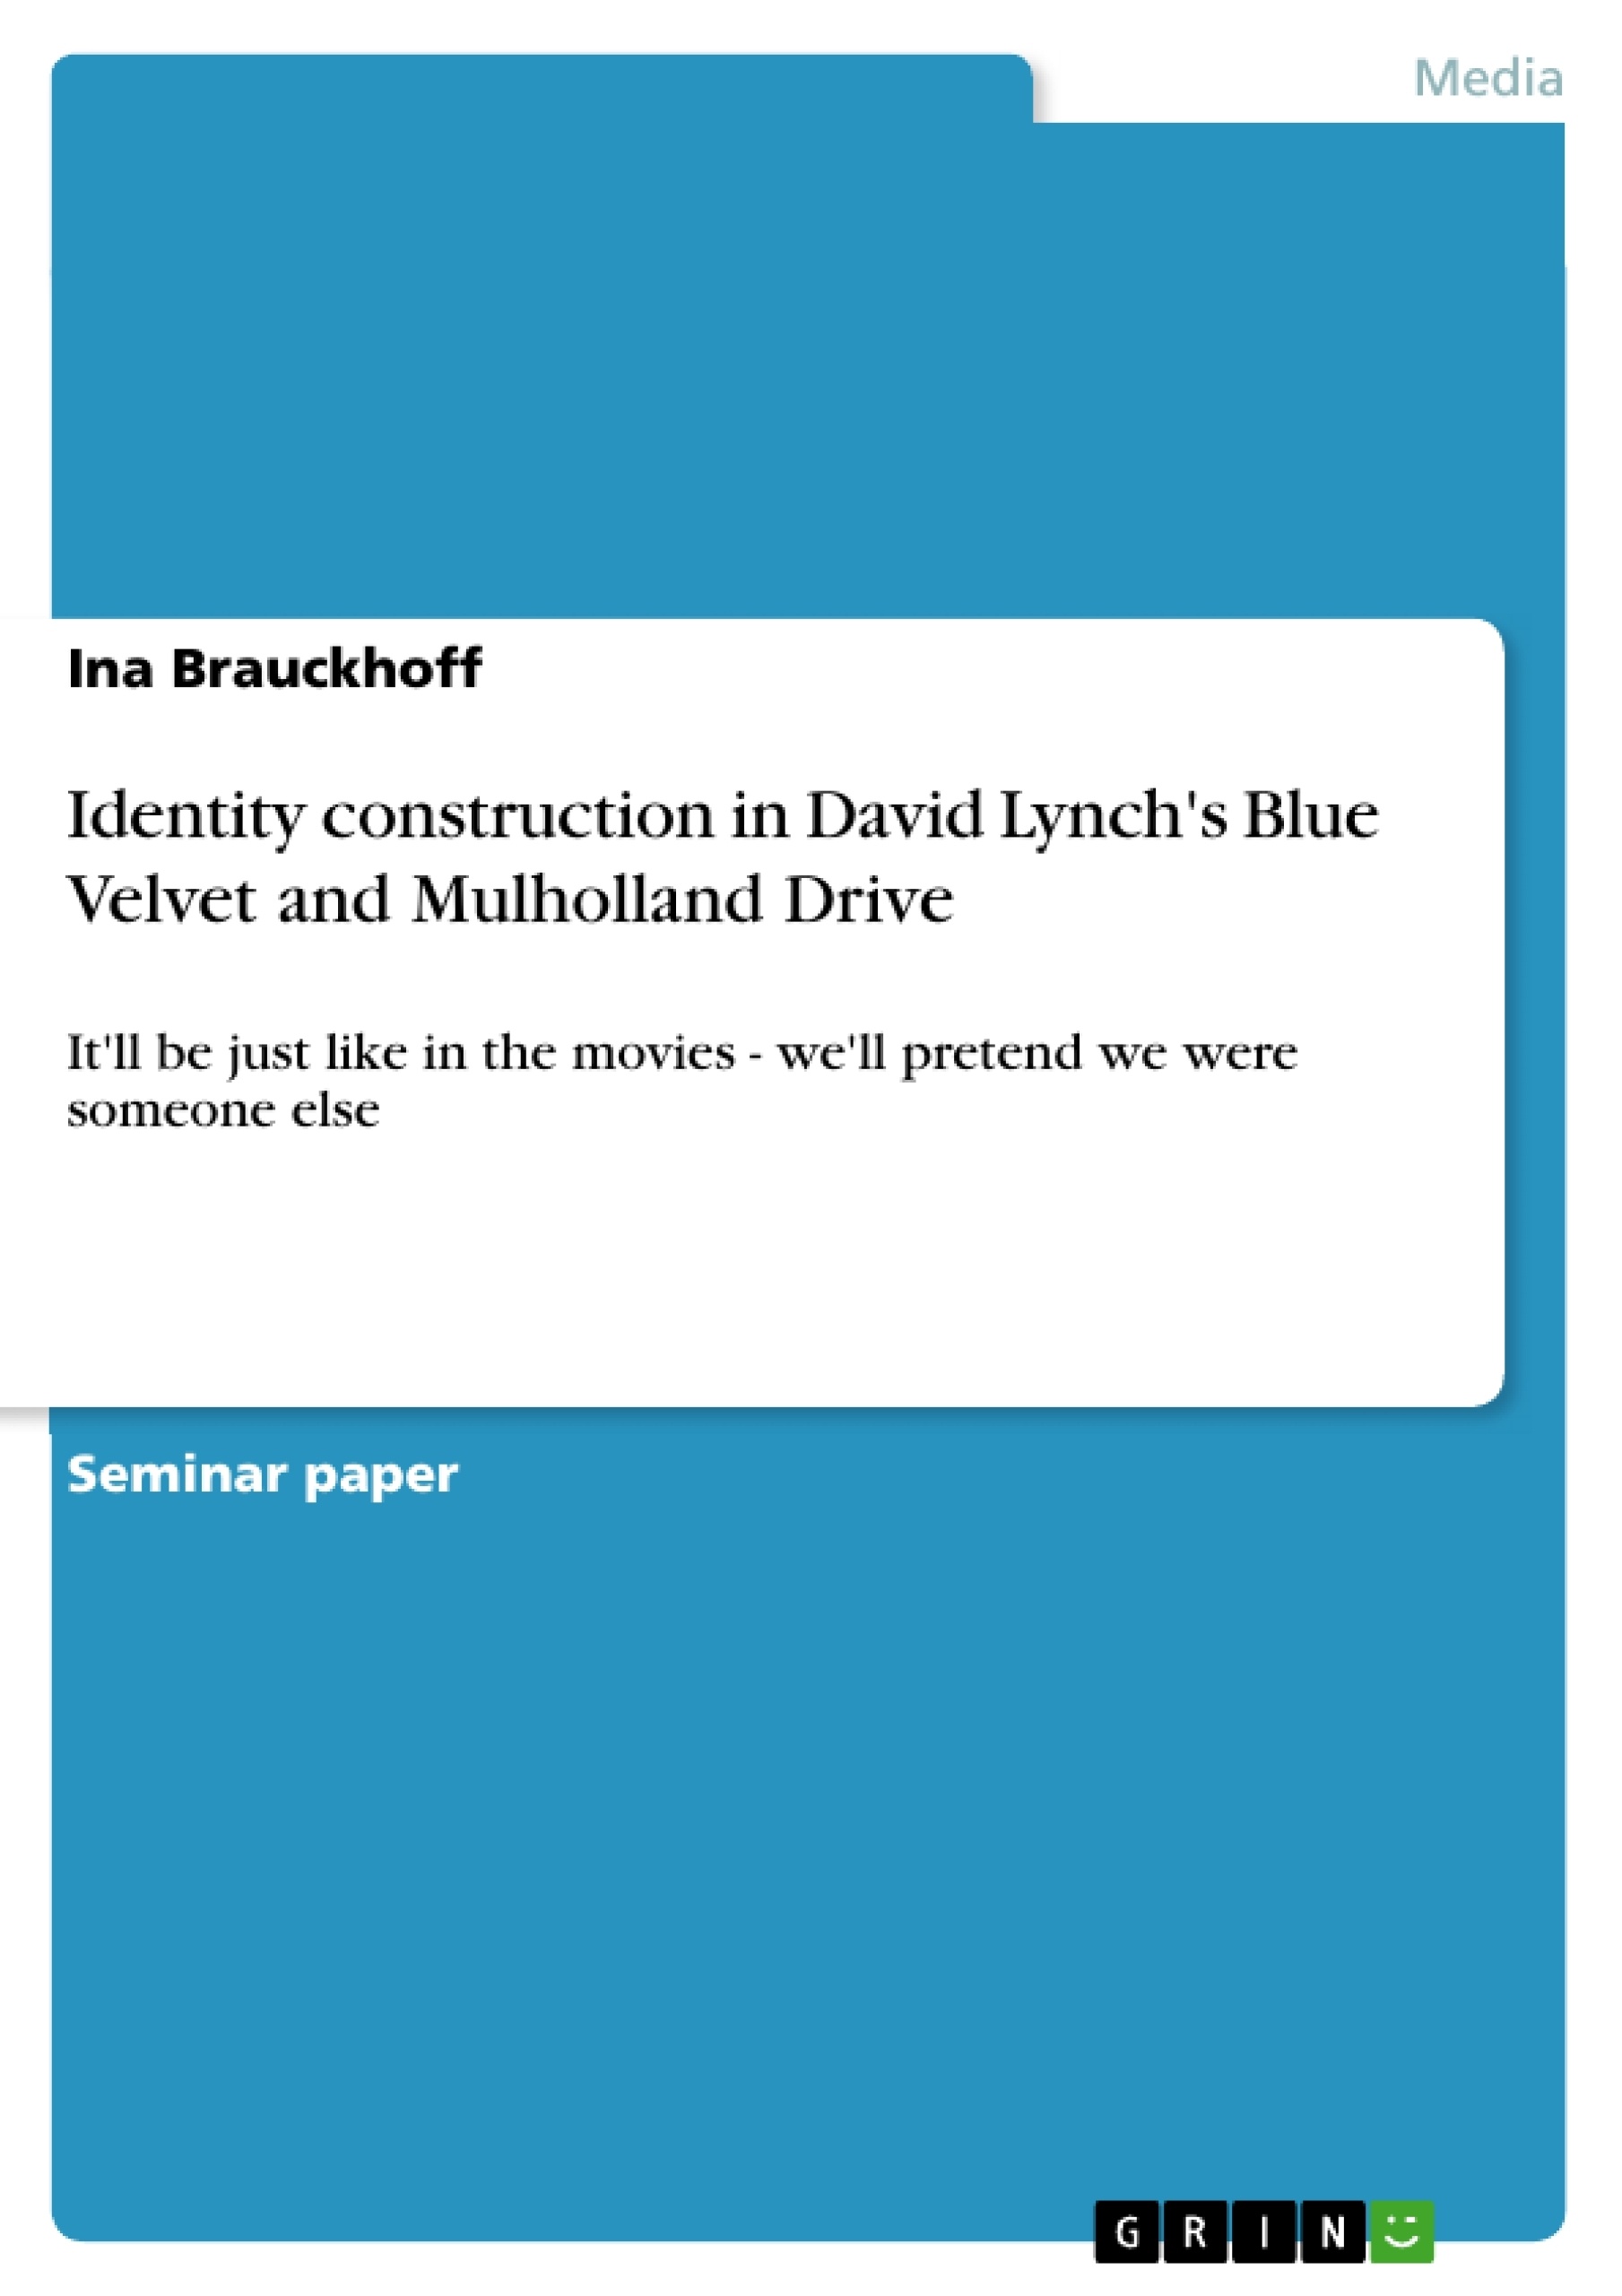 Título: Identity construction in David Lynch's Blue Velvet and Mulholland Drive